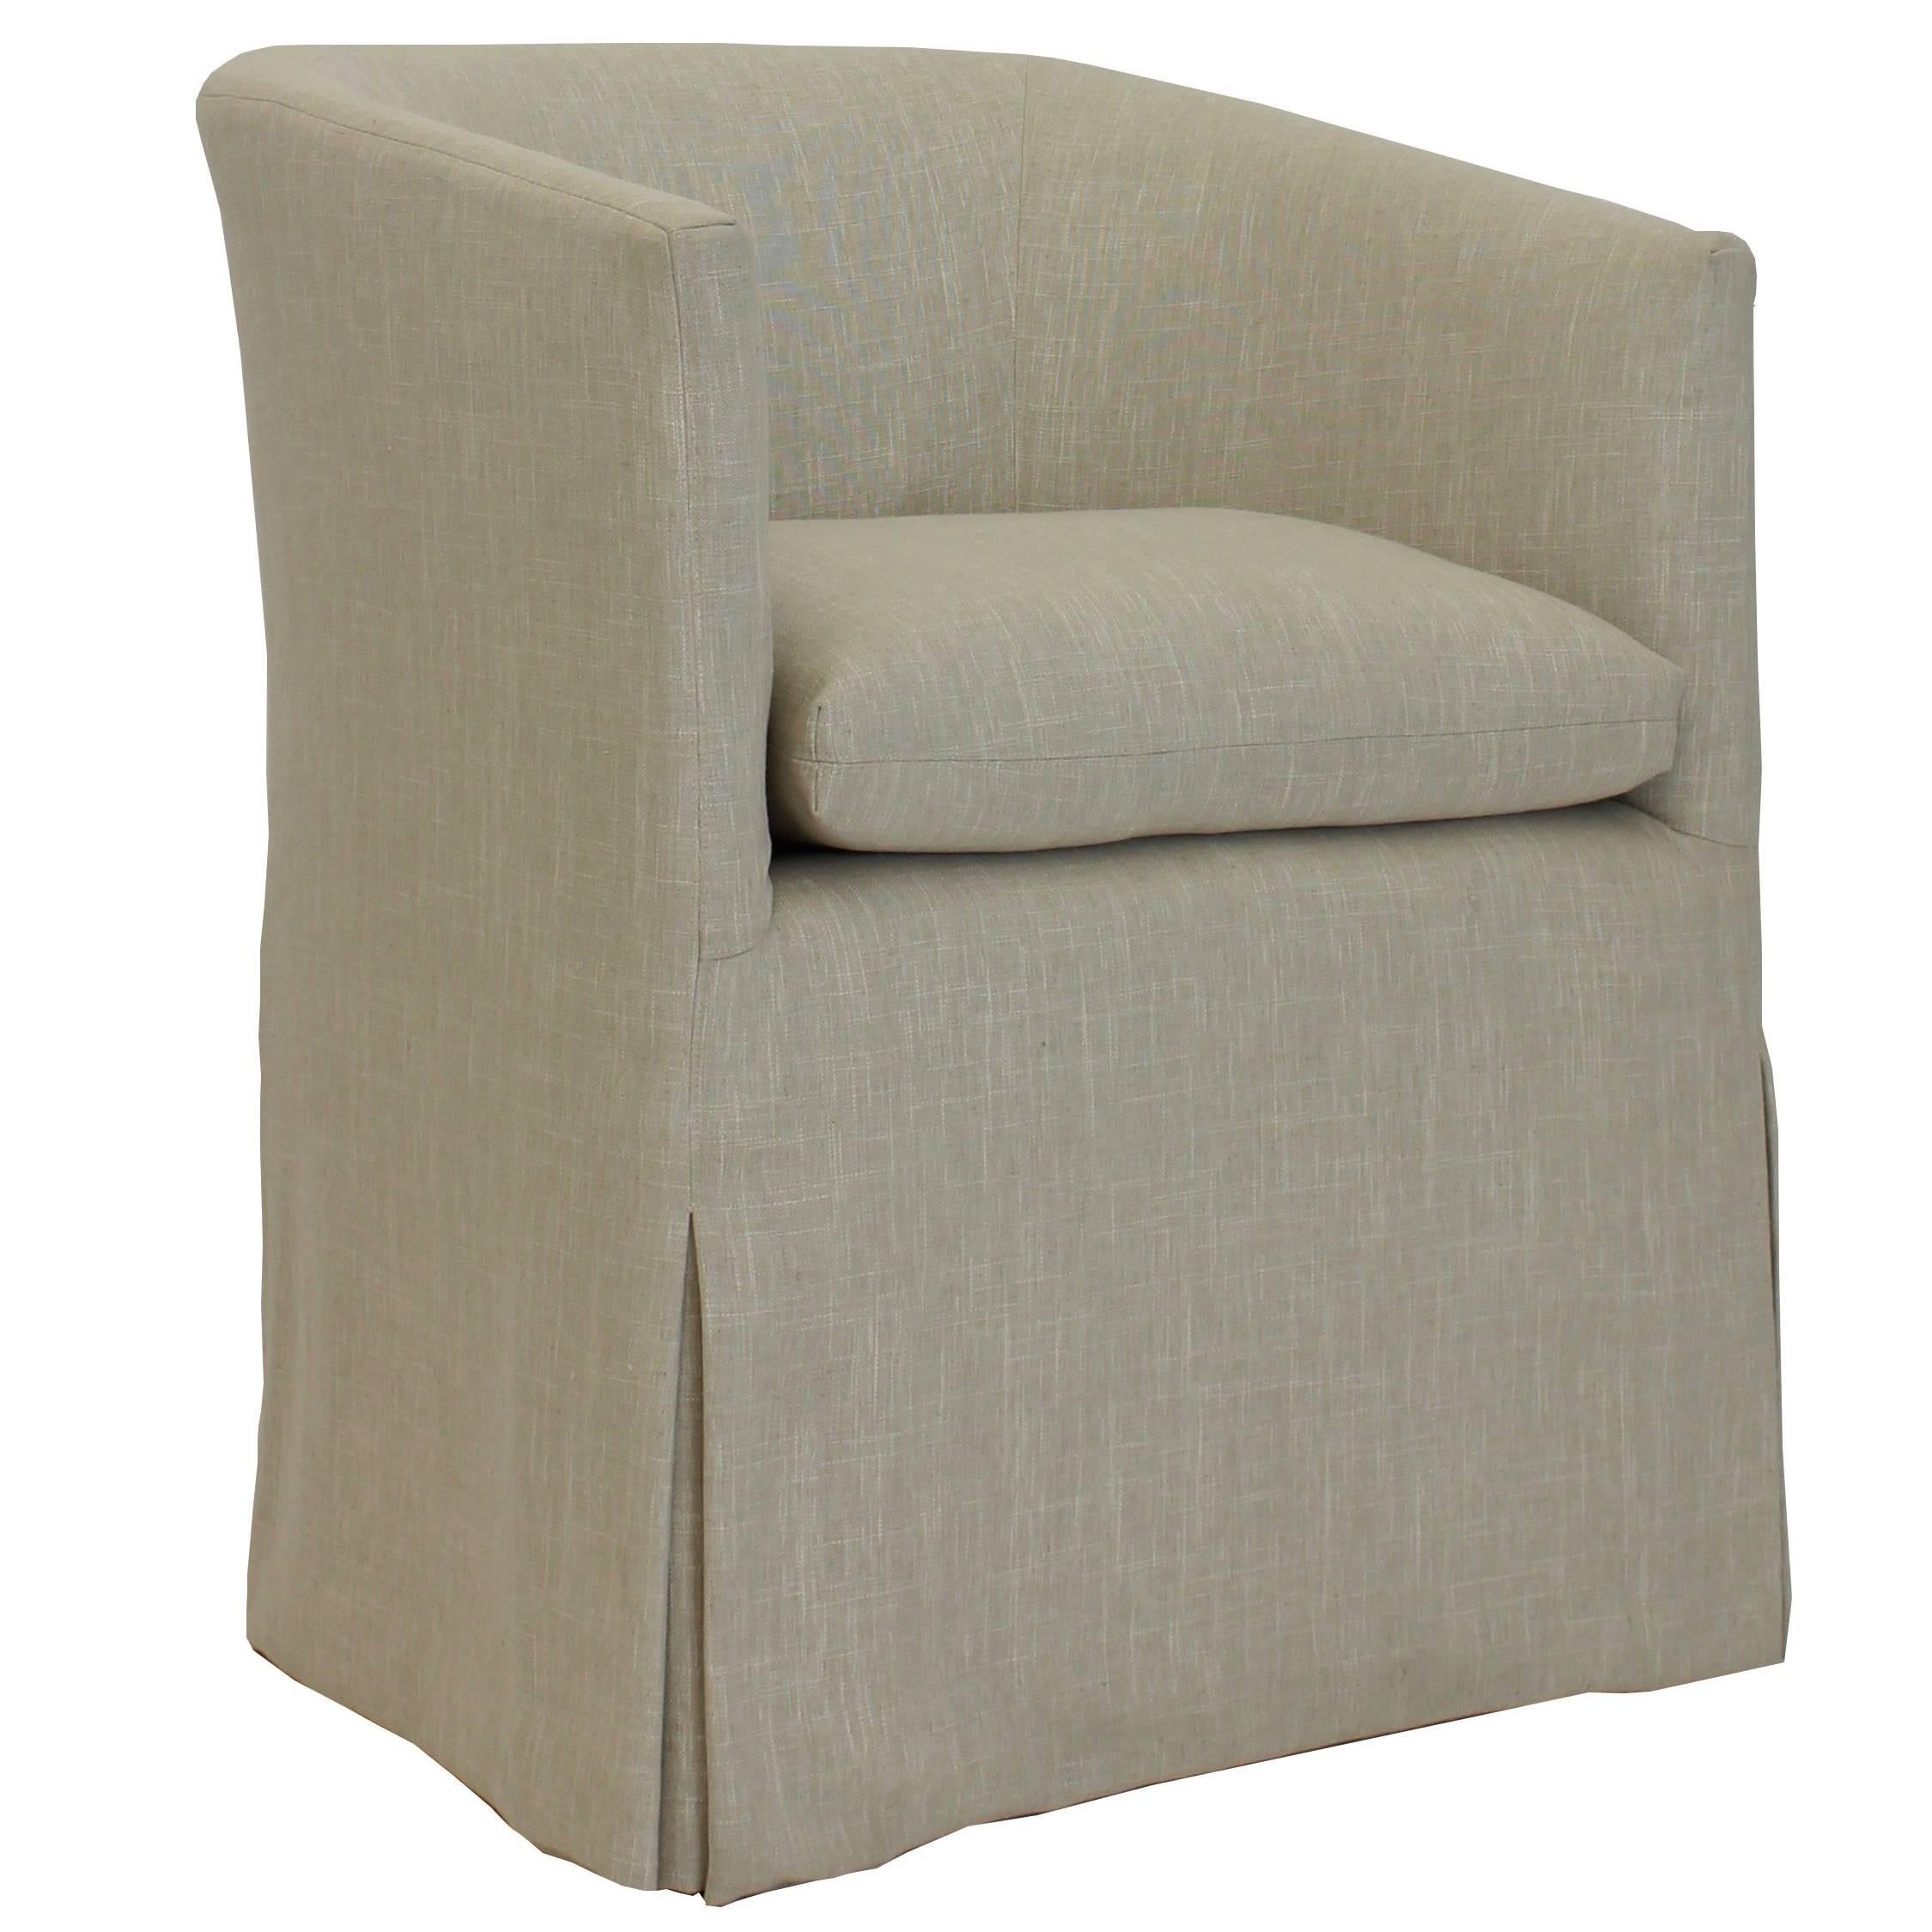 Transitional Barrel Dining Chair with Skirted Slipcover and Loose Cushion